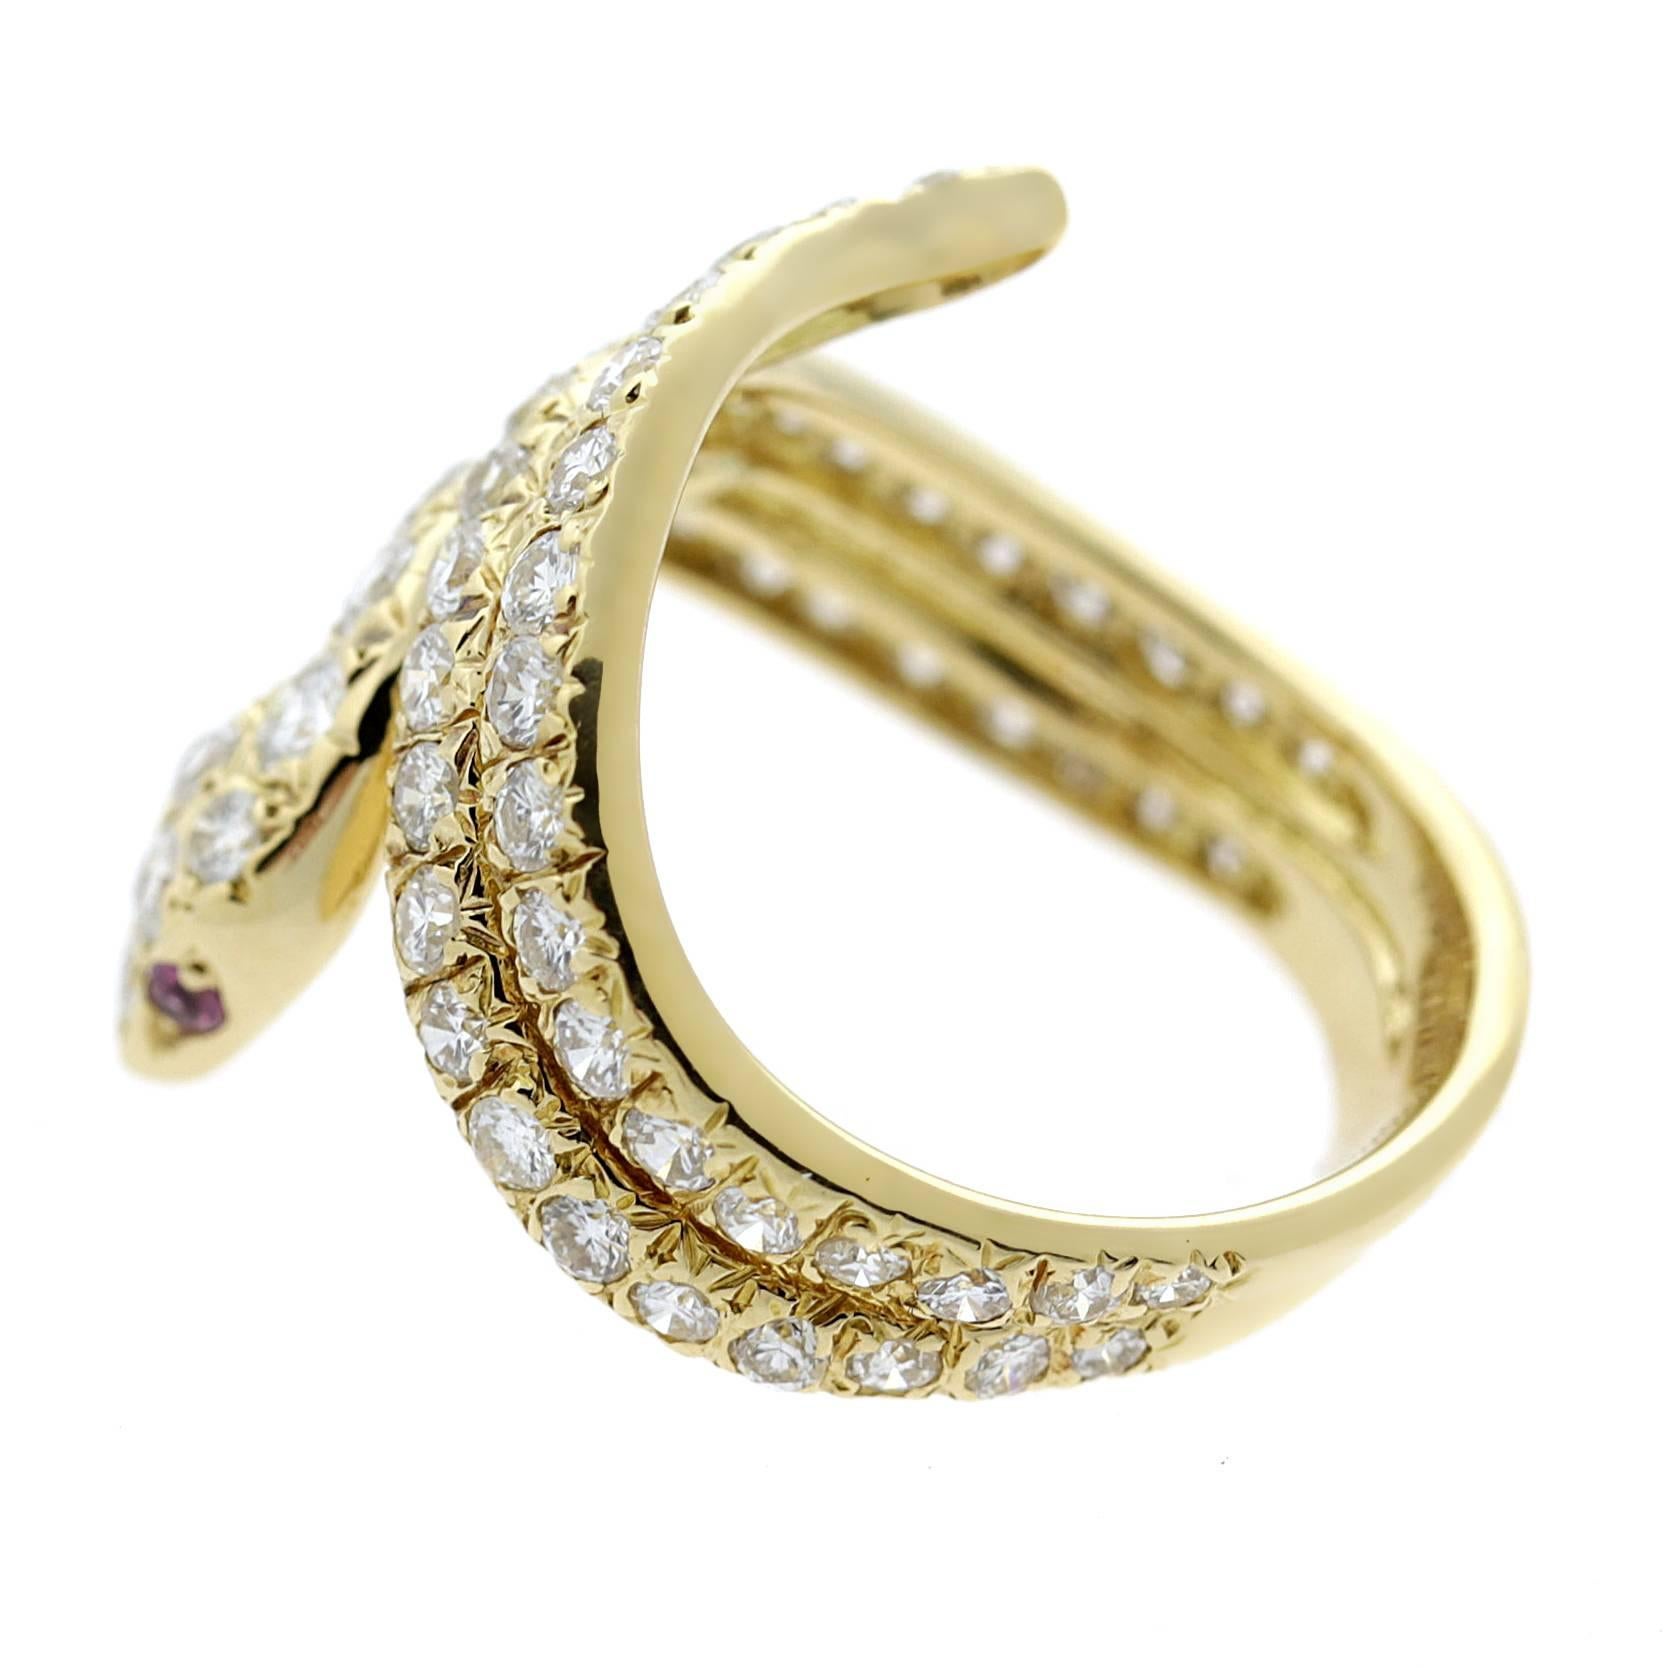 A magnificent Cartier ring featuring an alluring snake design paved with the finest Cartier round brilliant cut diamonds set in 18k yellow gold. 

Size: US 5
Ring Width: .82″ Inches

Inventory ID: 0000142